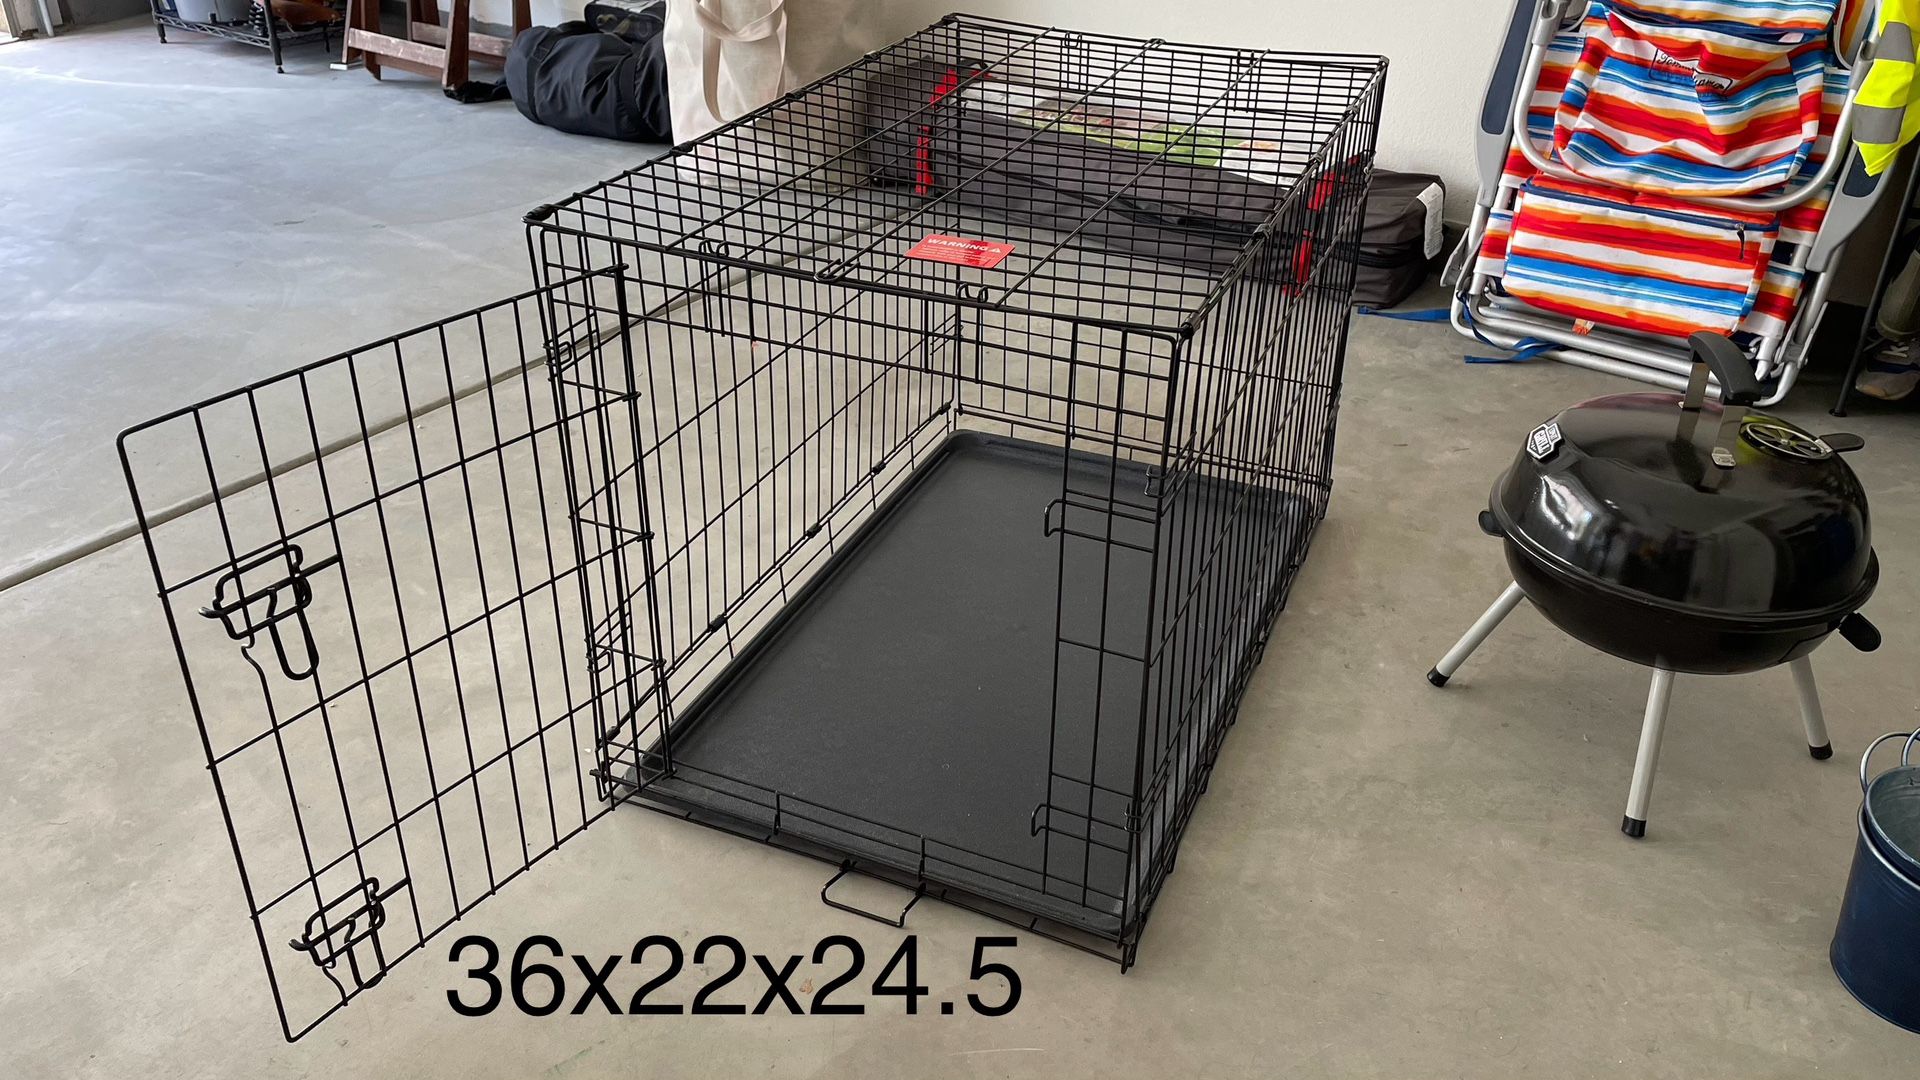 Medium Dog crate (if Posted Still Available)